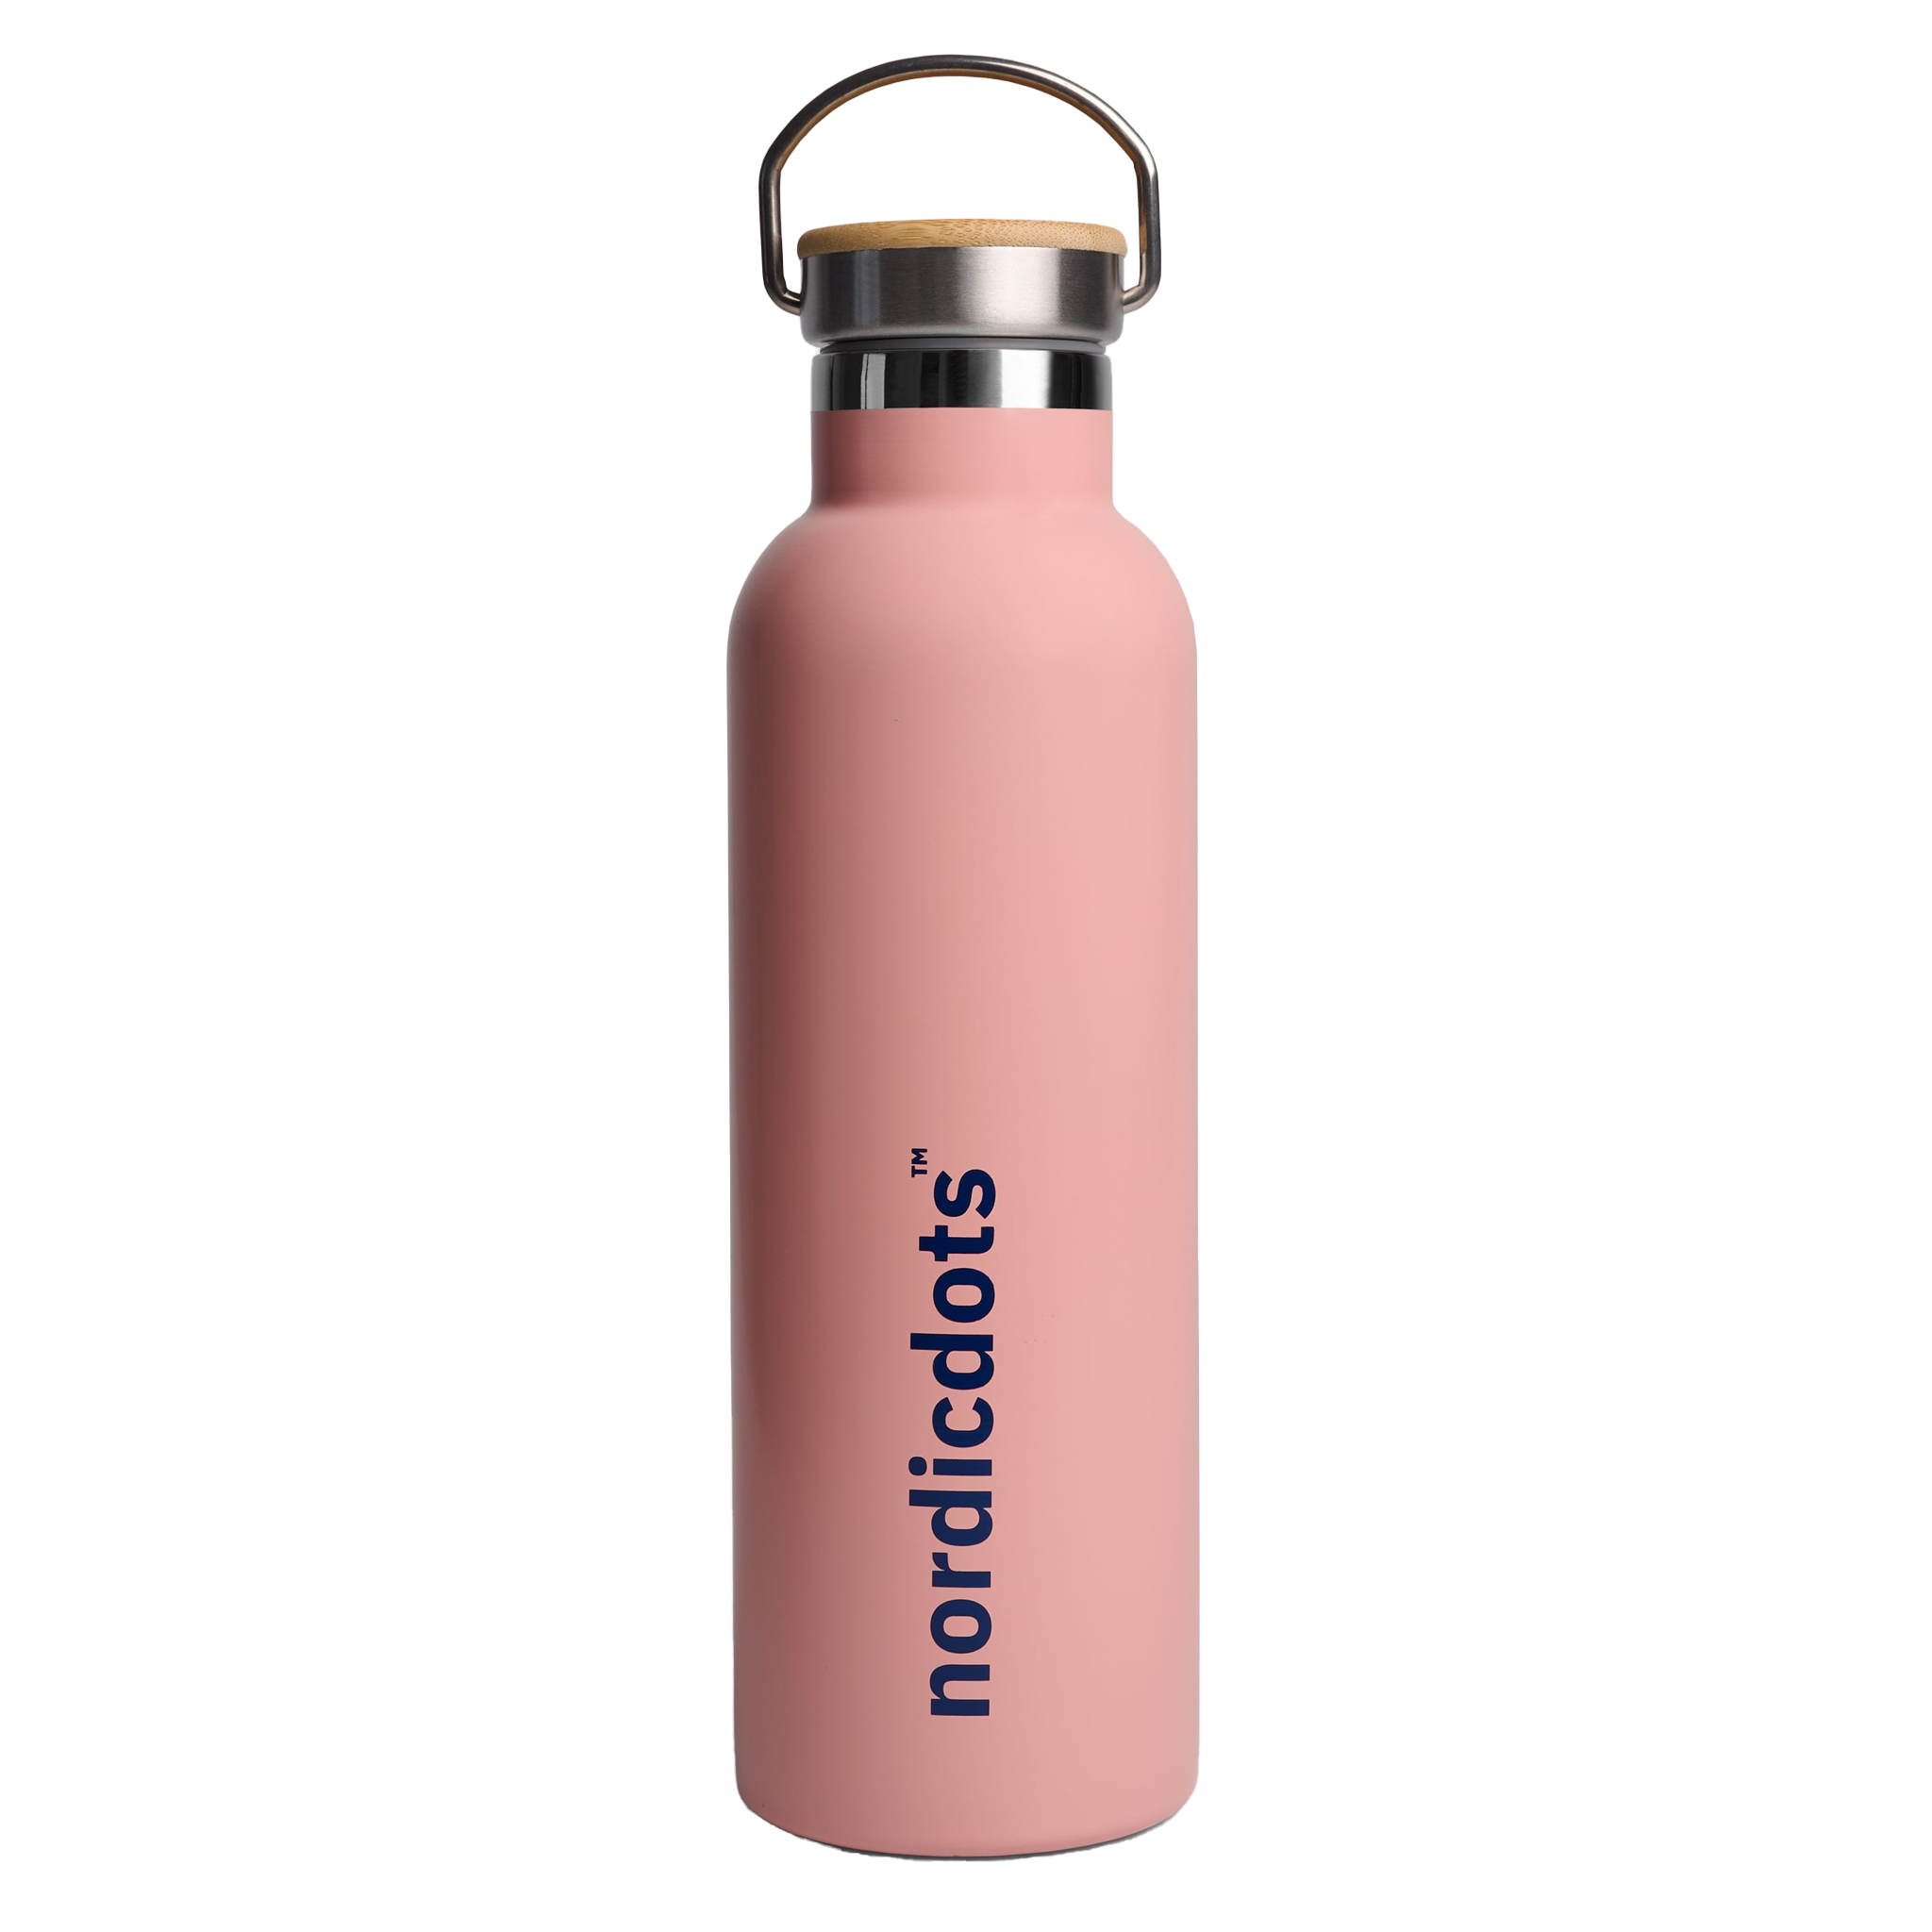 nordicdots Don't Leave Me Water Bottle - Tropical Peach